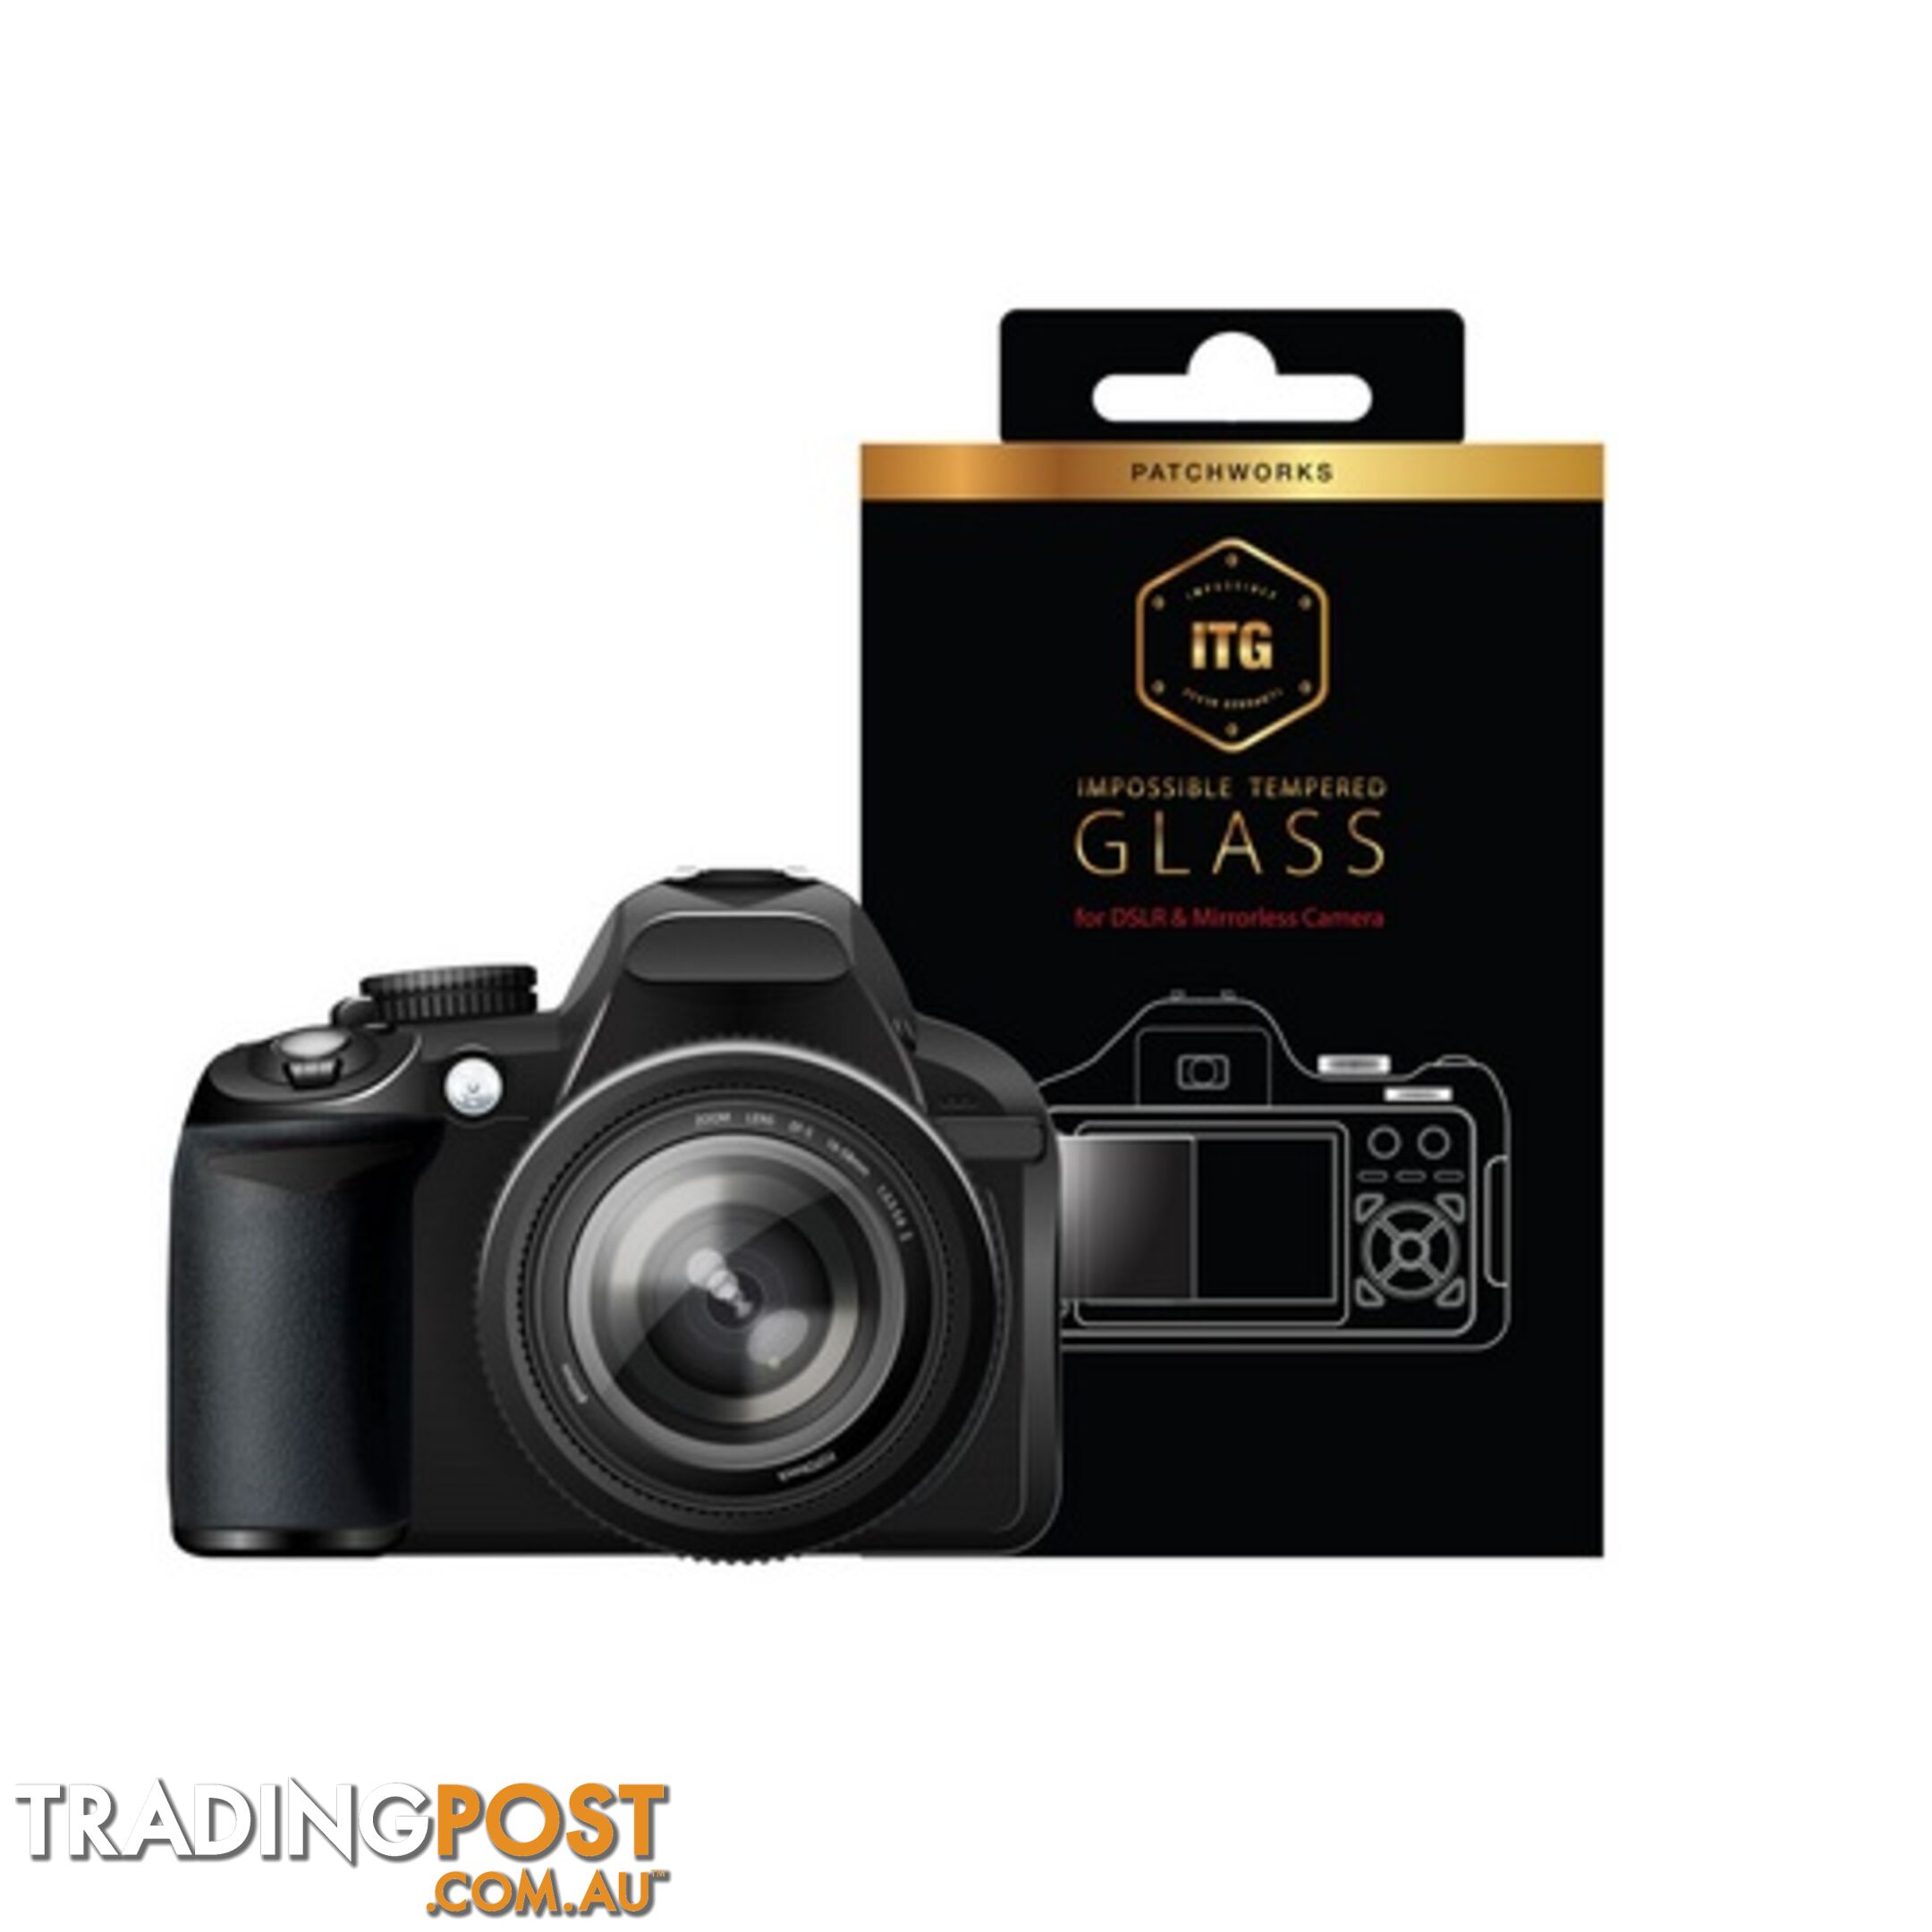 Patchworks ITG Tempered Glass for Canon G1 X Mark2 / 100D DSLR - 8809453310054/IC104 - Patchworks